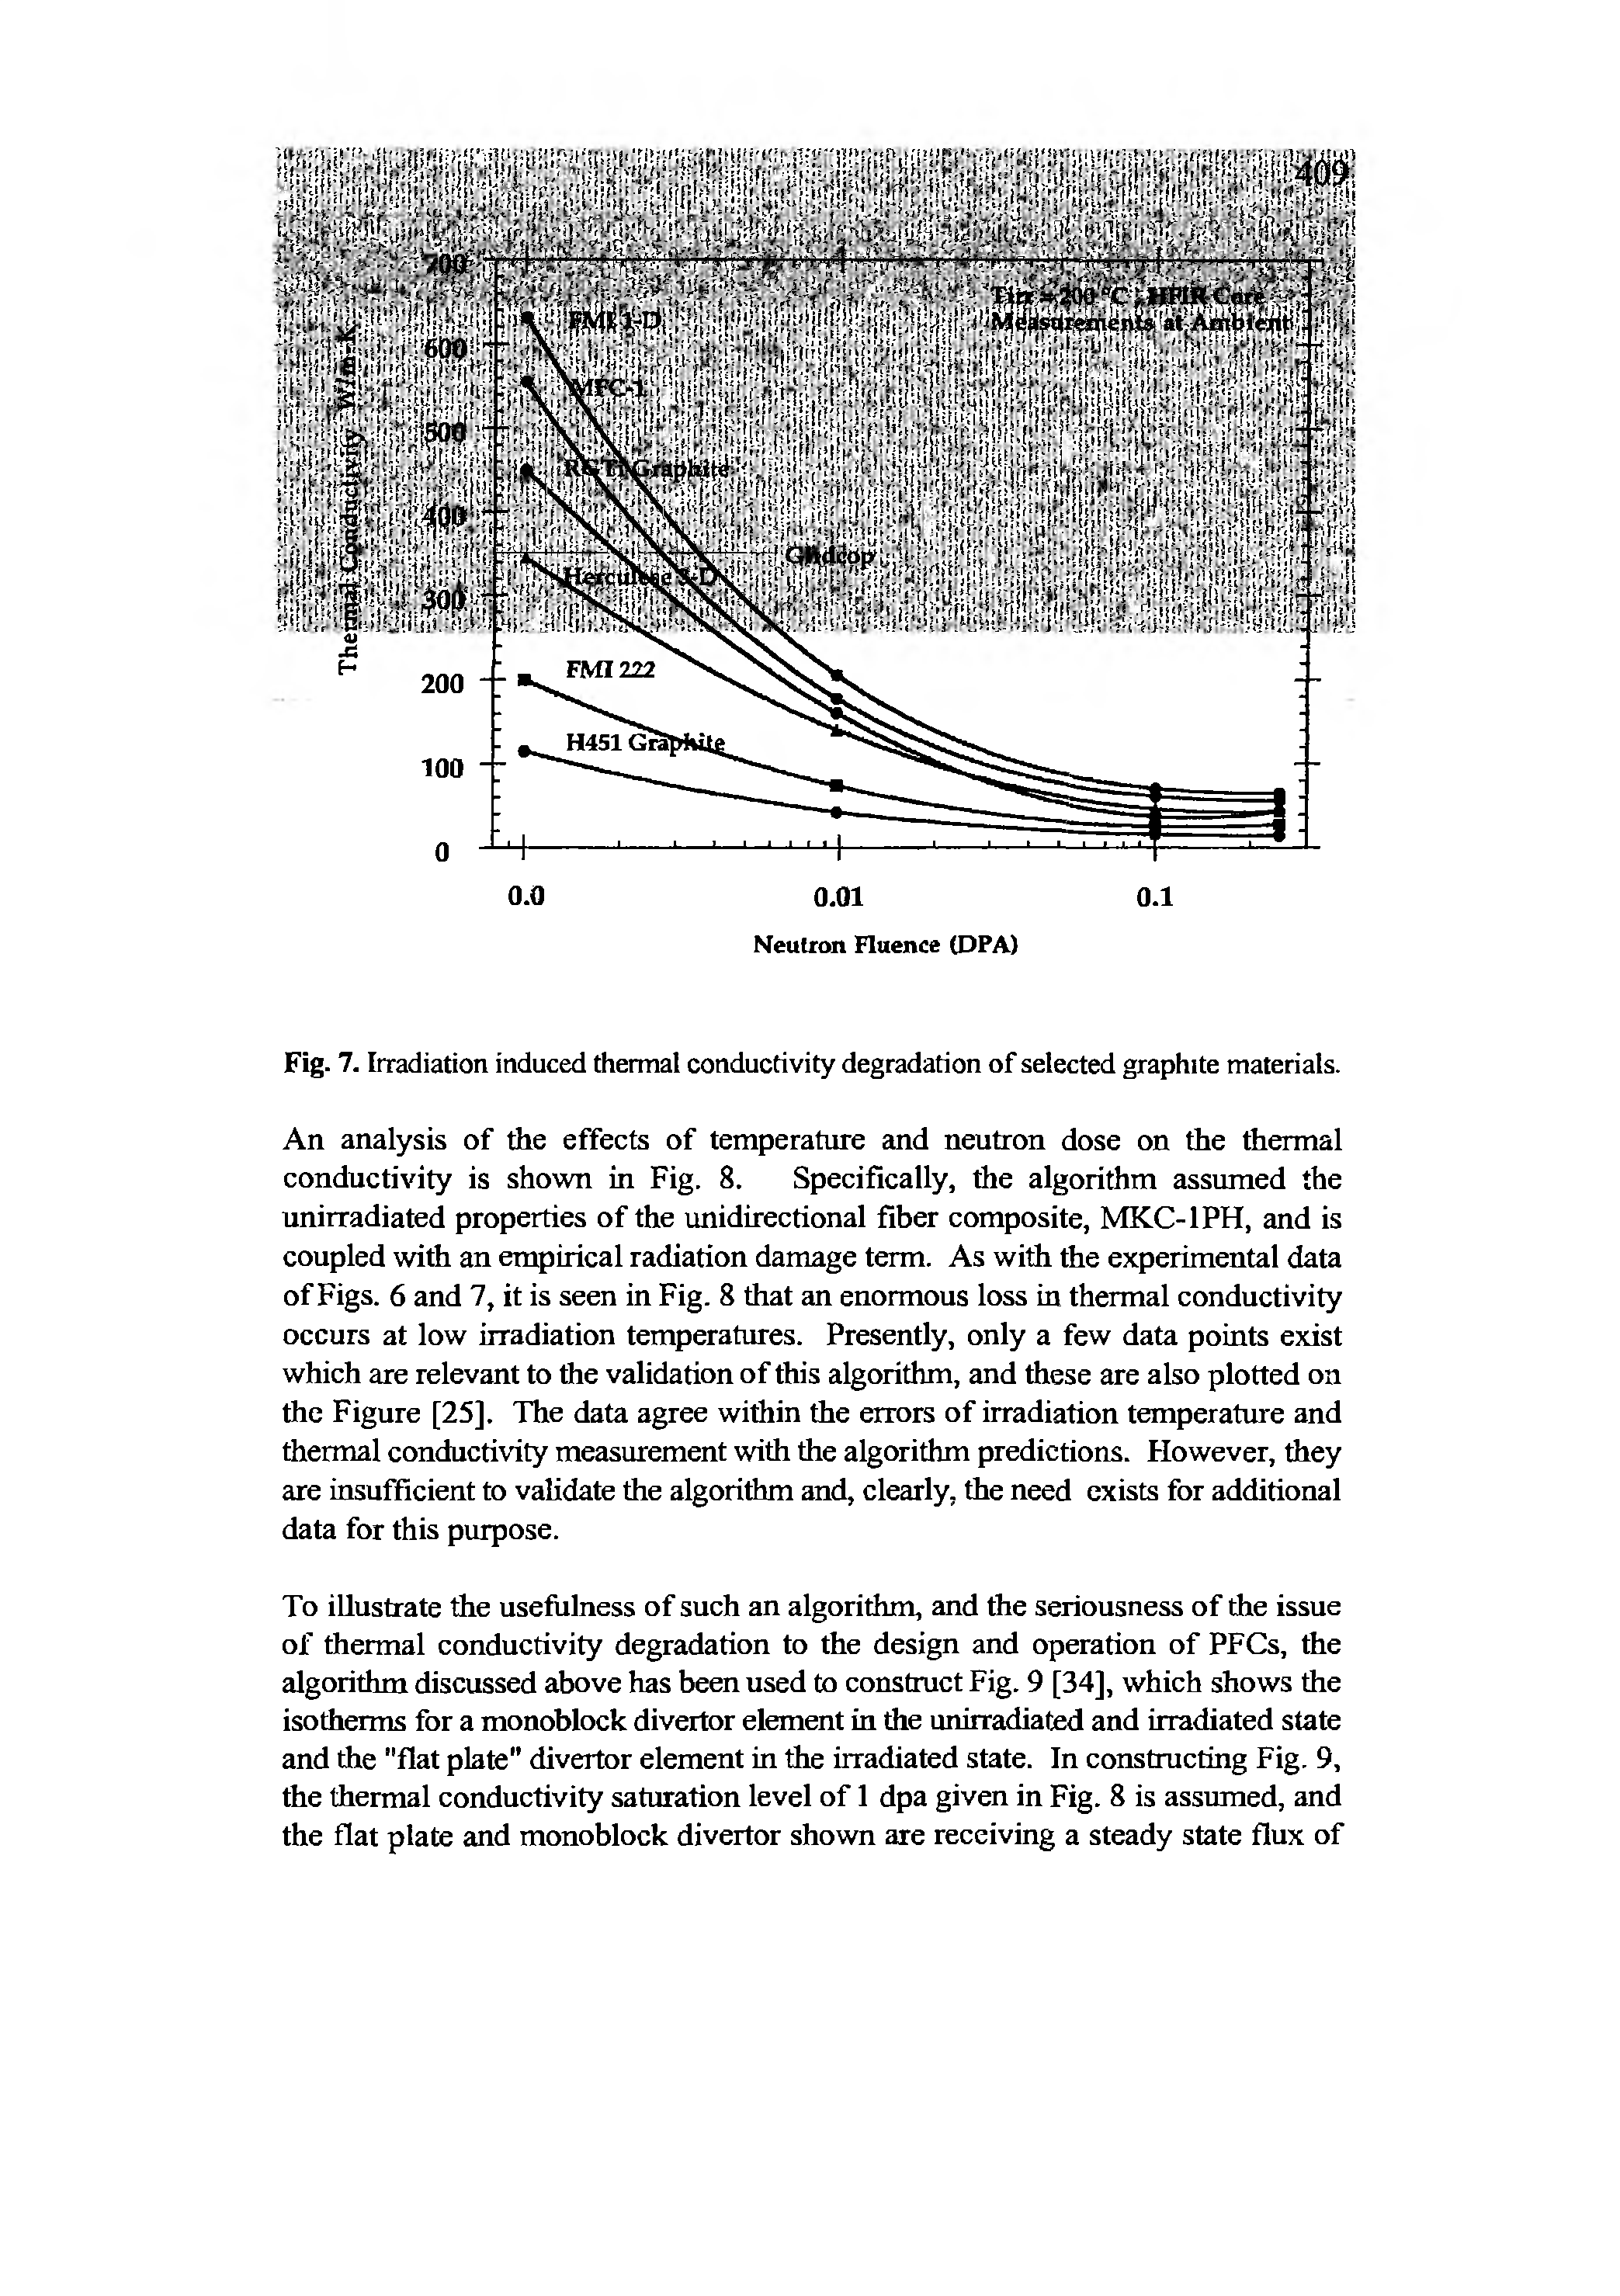 Fig. 7. Irradiation induced thermal conductivity degradation of selected graphite materials.